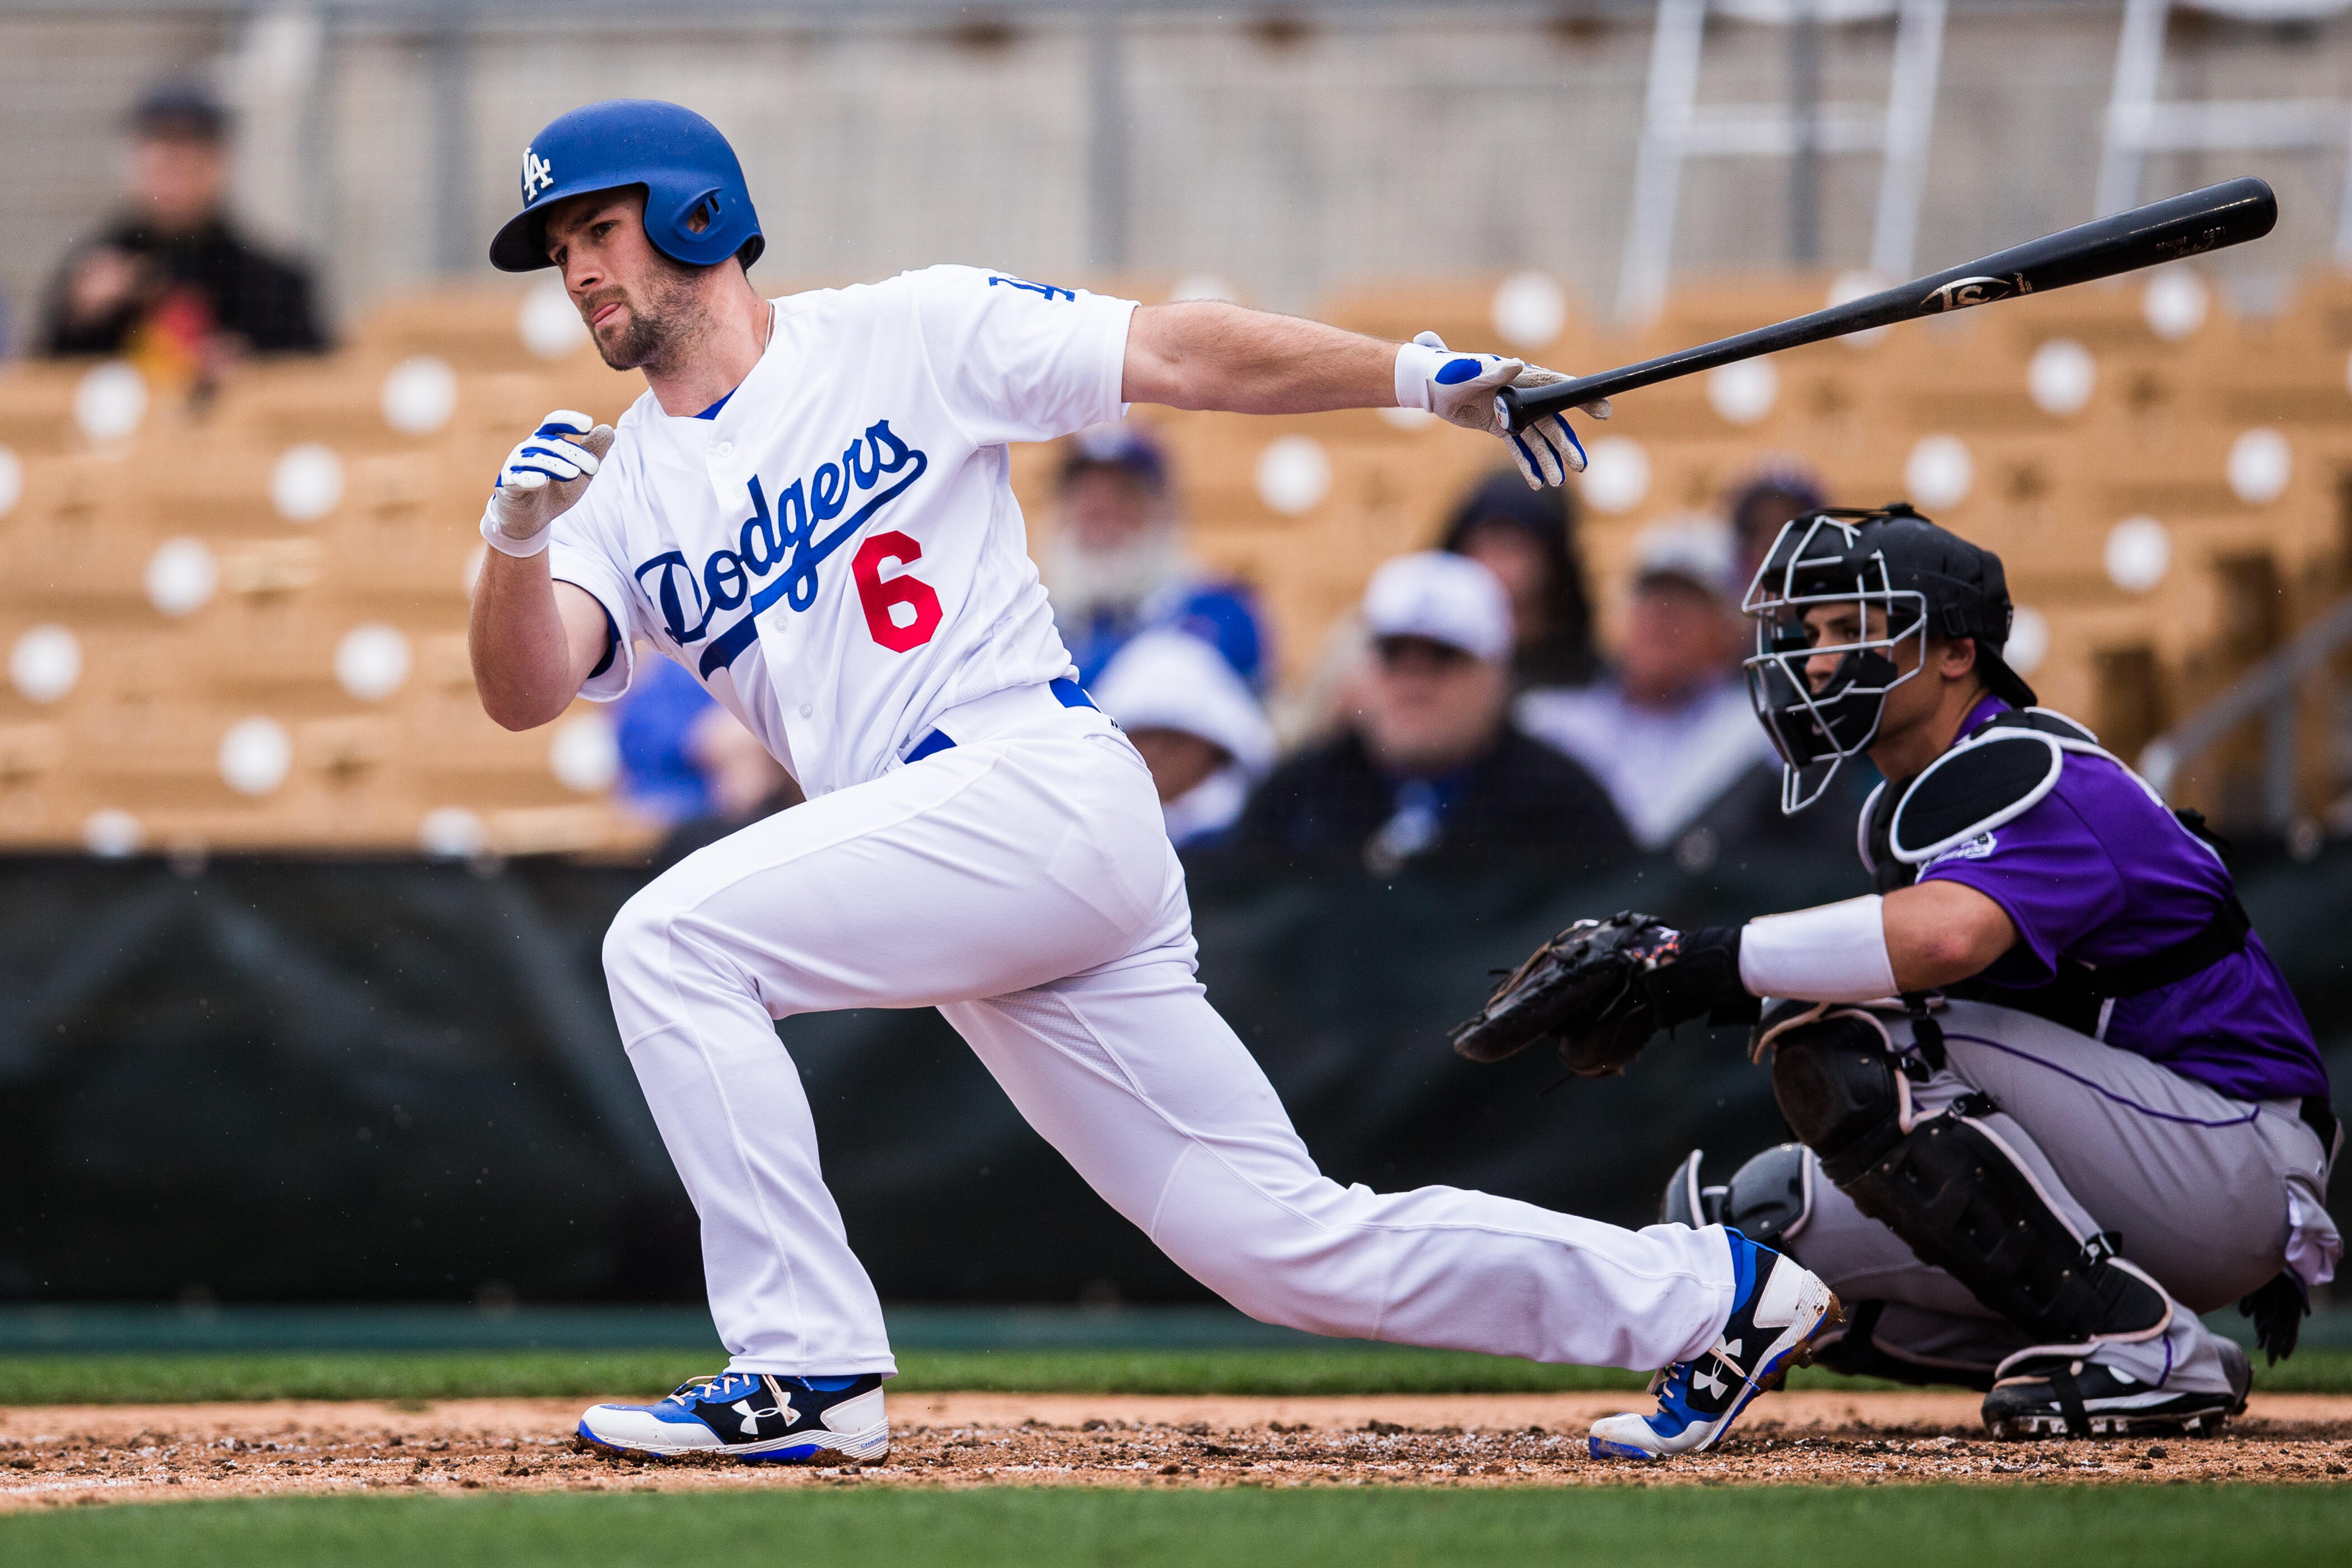 GLENDALE, AZ - FEBRUARY 27:  Charlie Culberson #6 of the Los Angeles Dodgers singles in the third inning during a spring training game against the Colorado Rockies at Camelback Ranch on February 27, 2017 in Glendale, Arizona. (Photo by Rob Tringali/Getty 